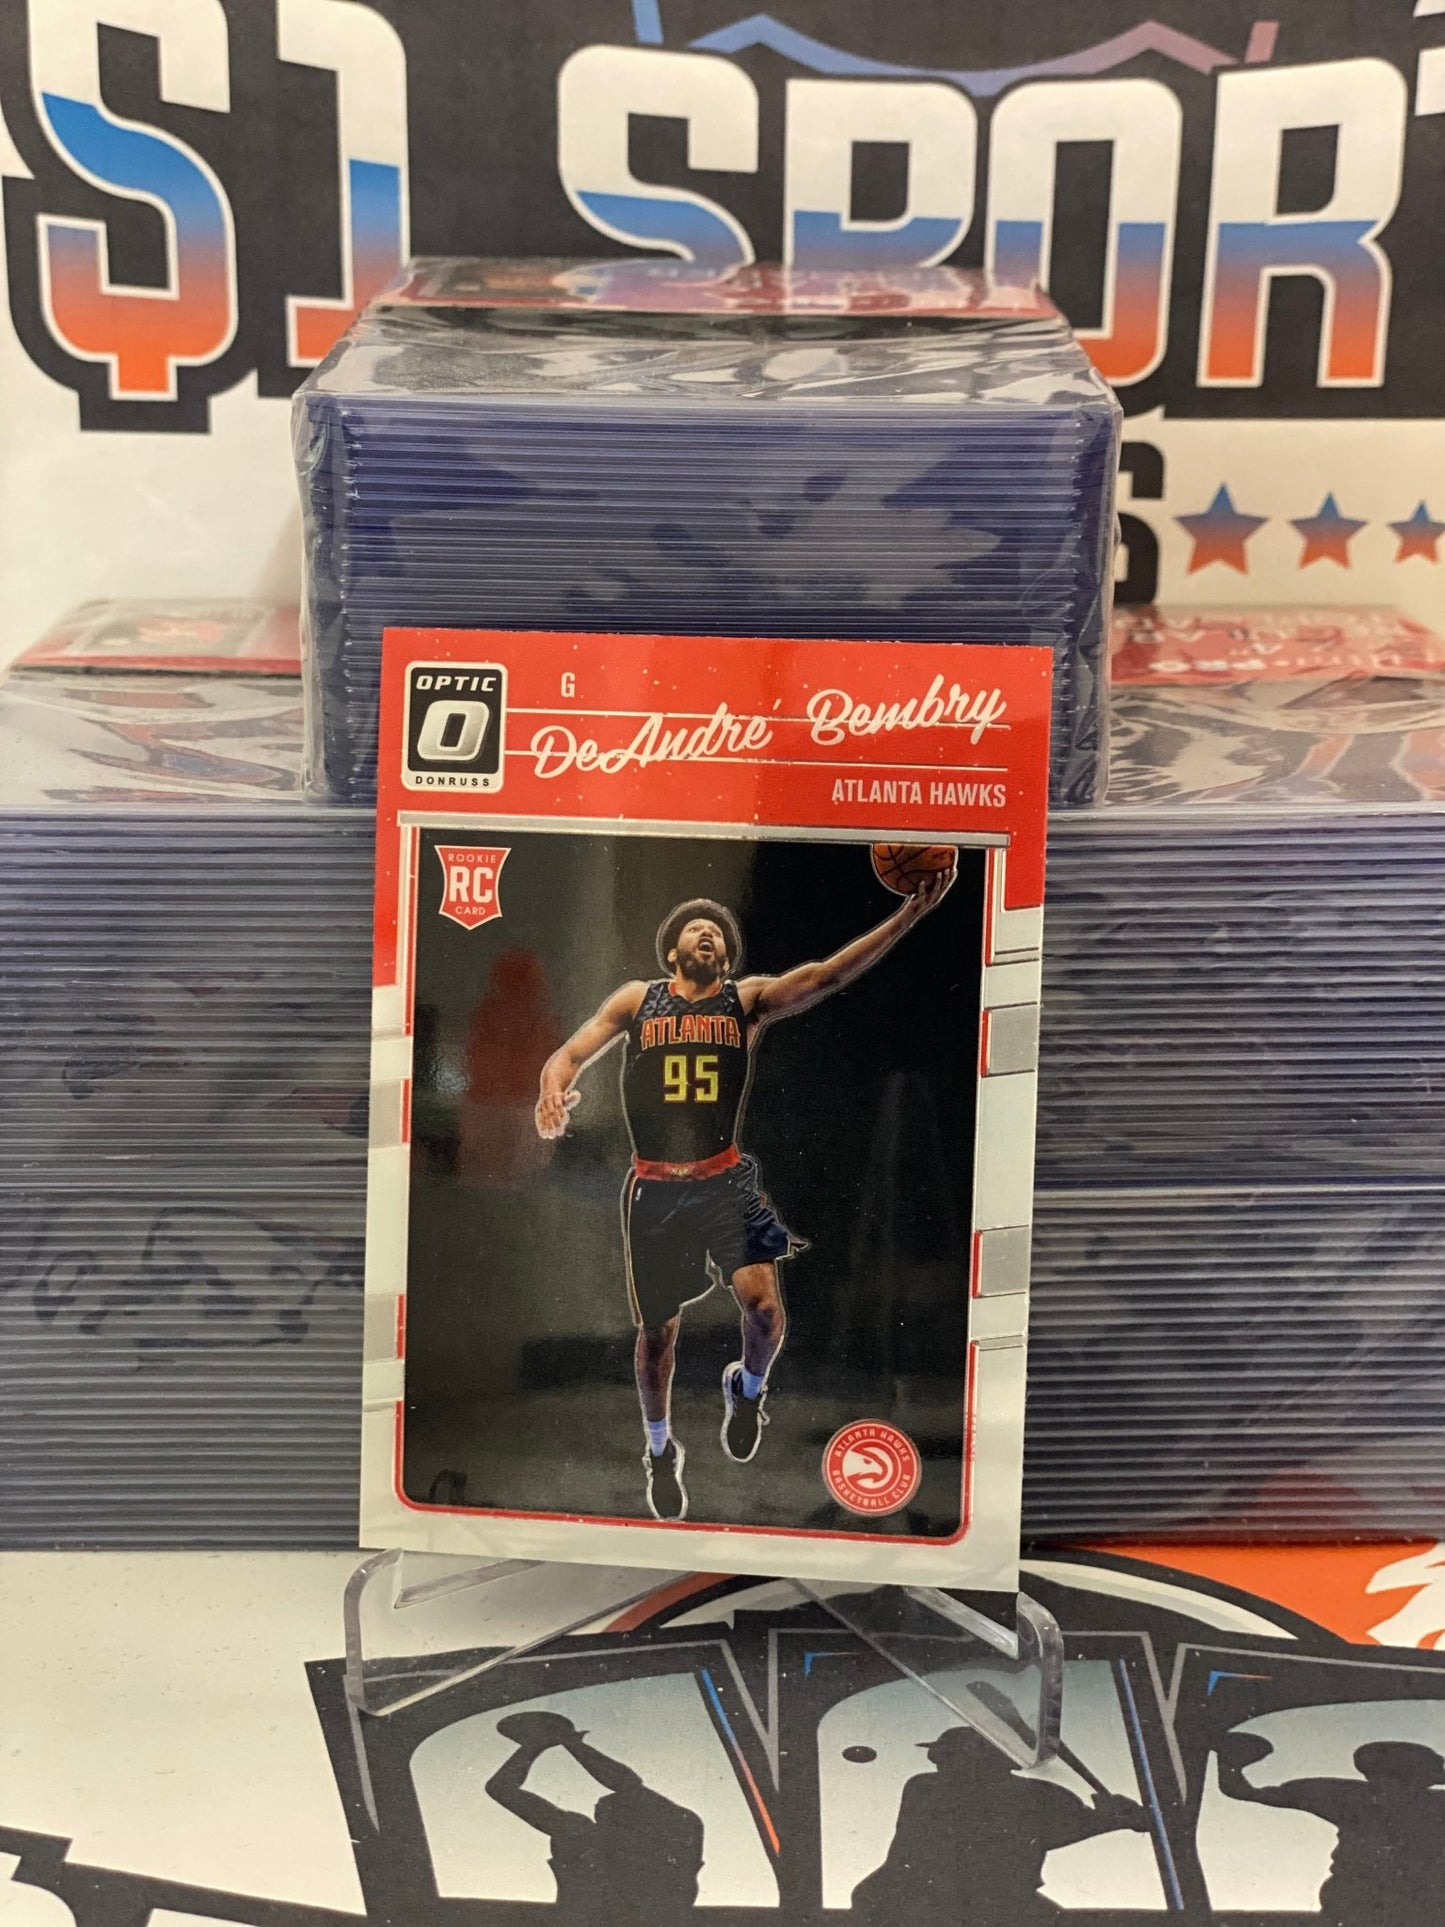 2016 Donruss Optic (Rated Rookie) DeAndre' Bembry #168